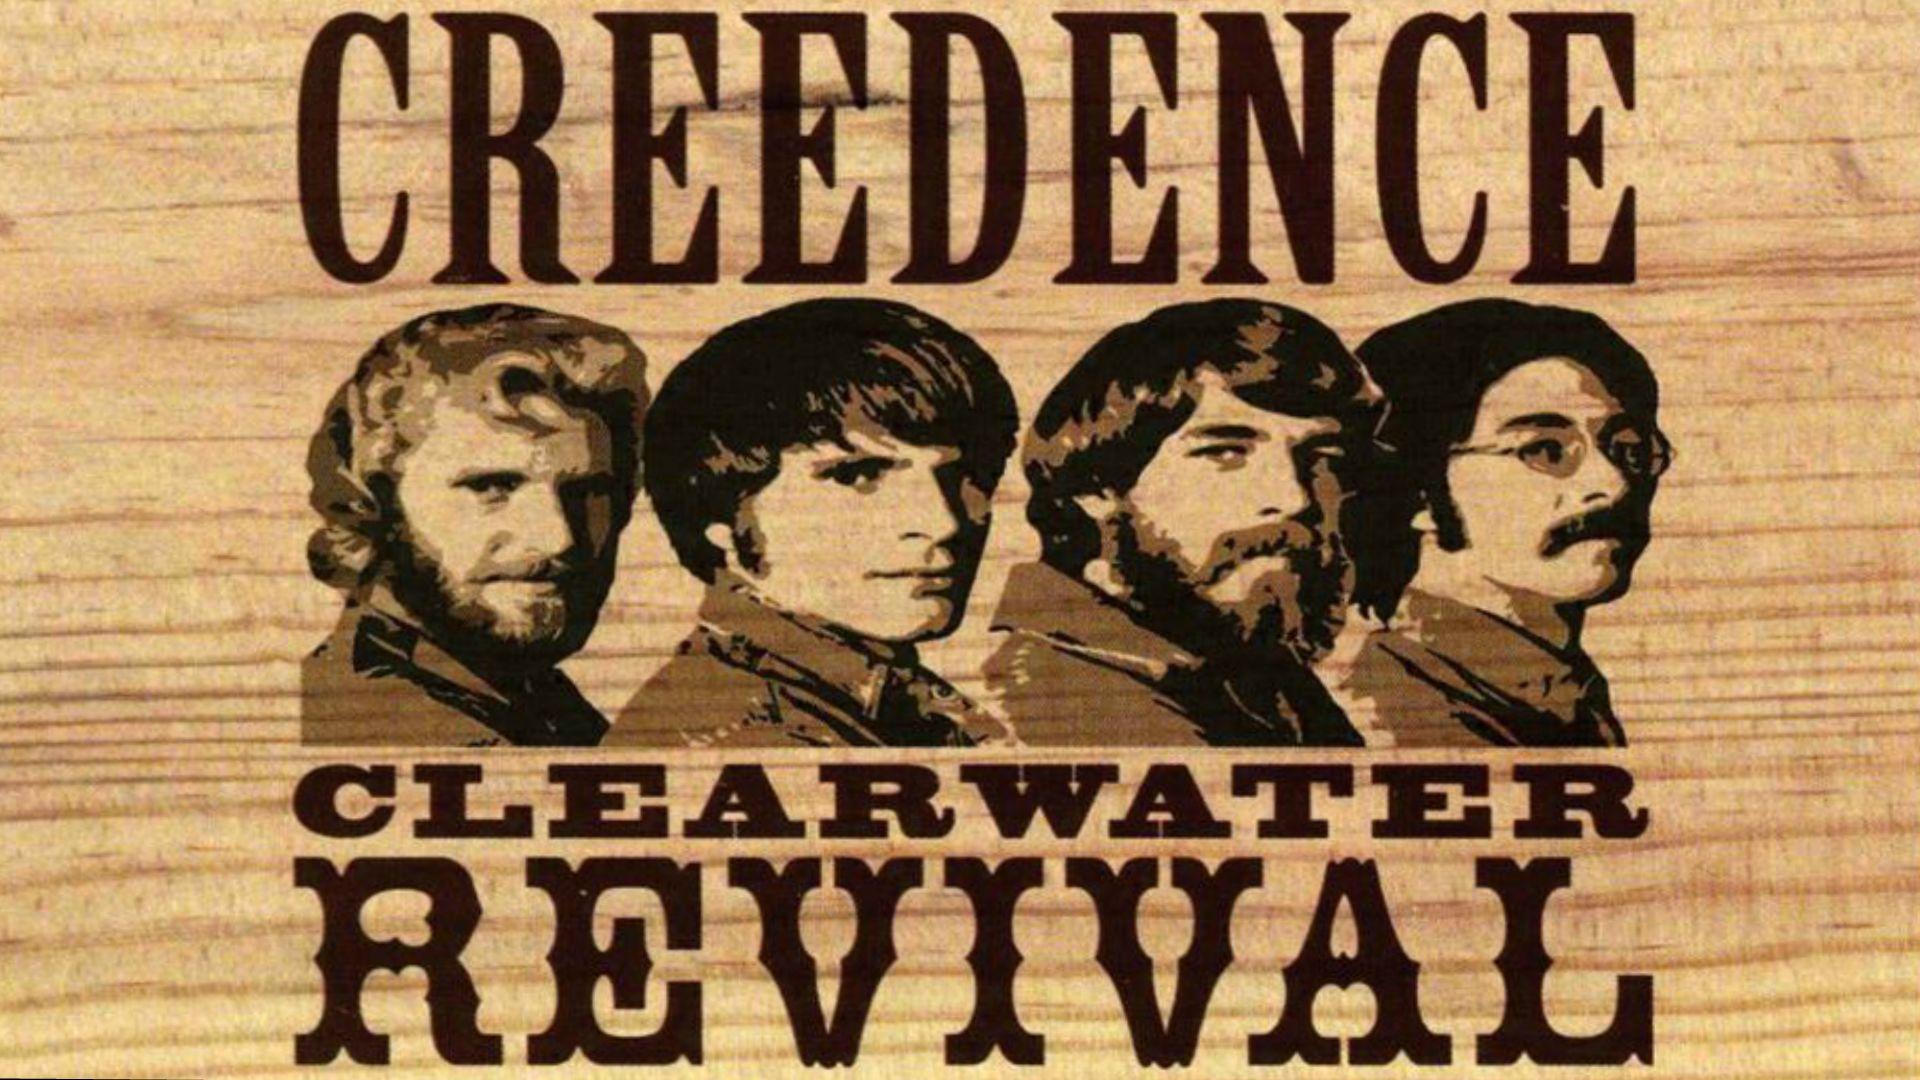 CREEDENCE CLEARWATER REVIVAL Full HD Wallpaper and Background